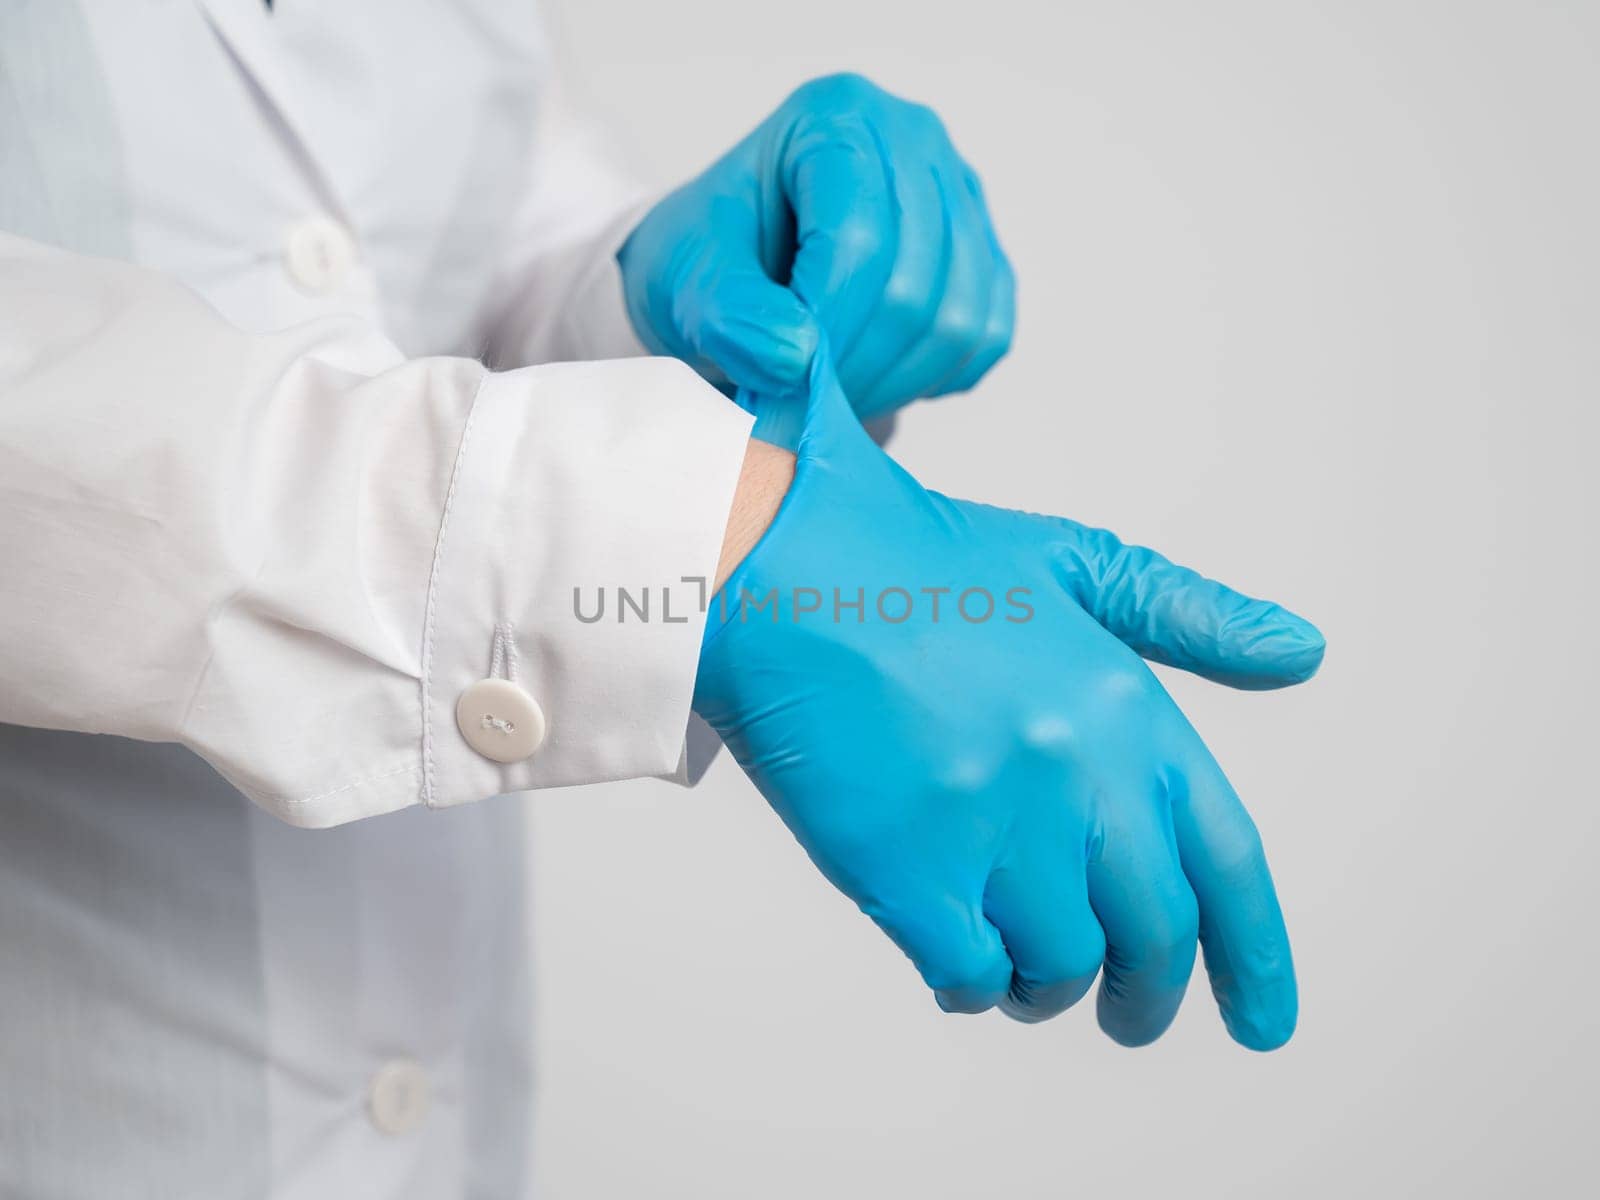 The doctor puts on latex gloves on a white background